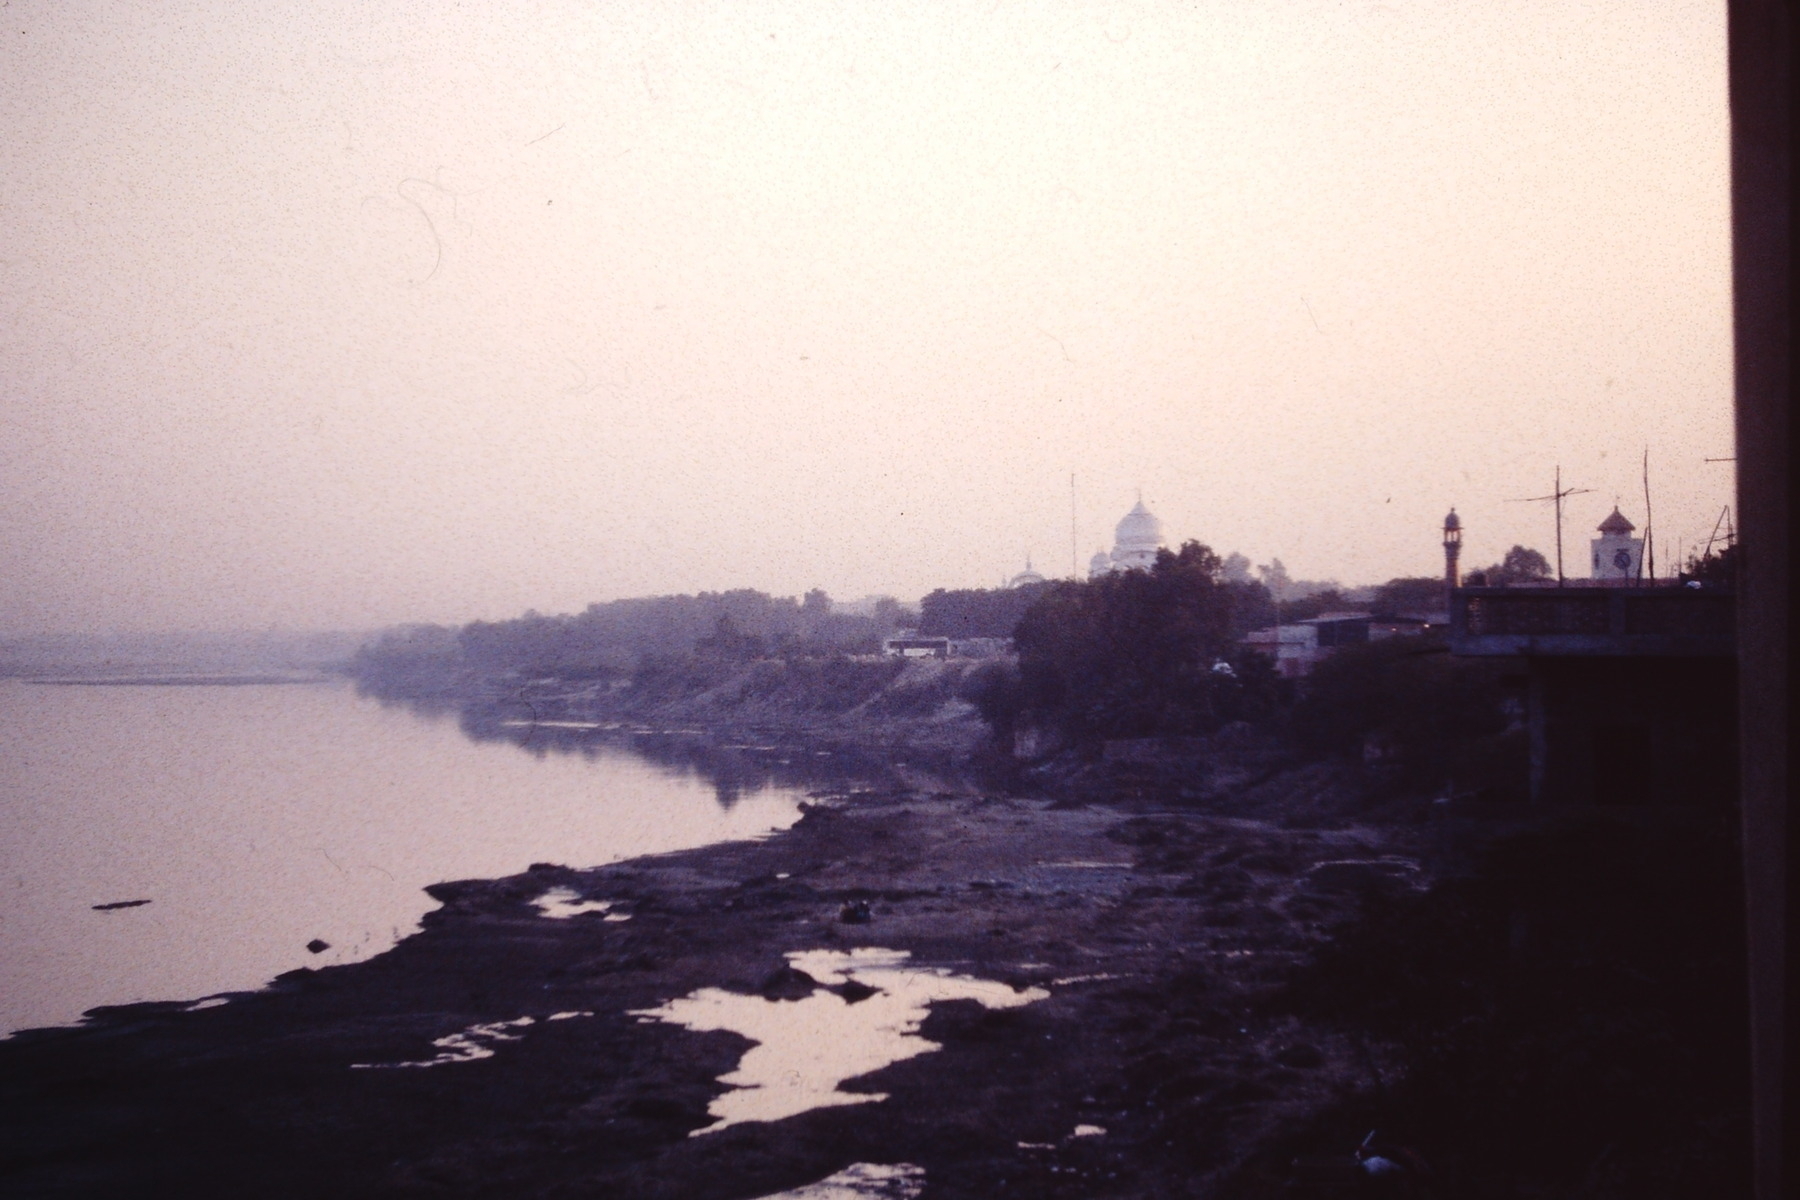 A calm river bends around a hazy landscape with buildings in the distance and a rocky shoreline in the foreground.